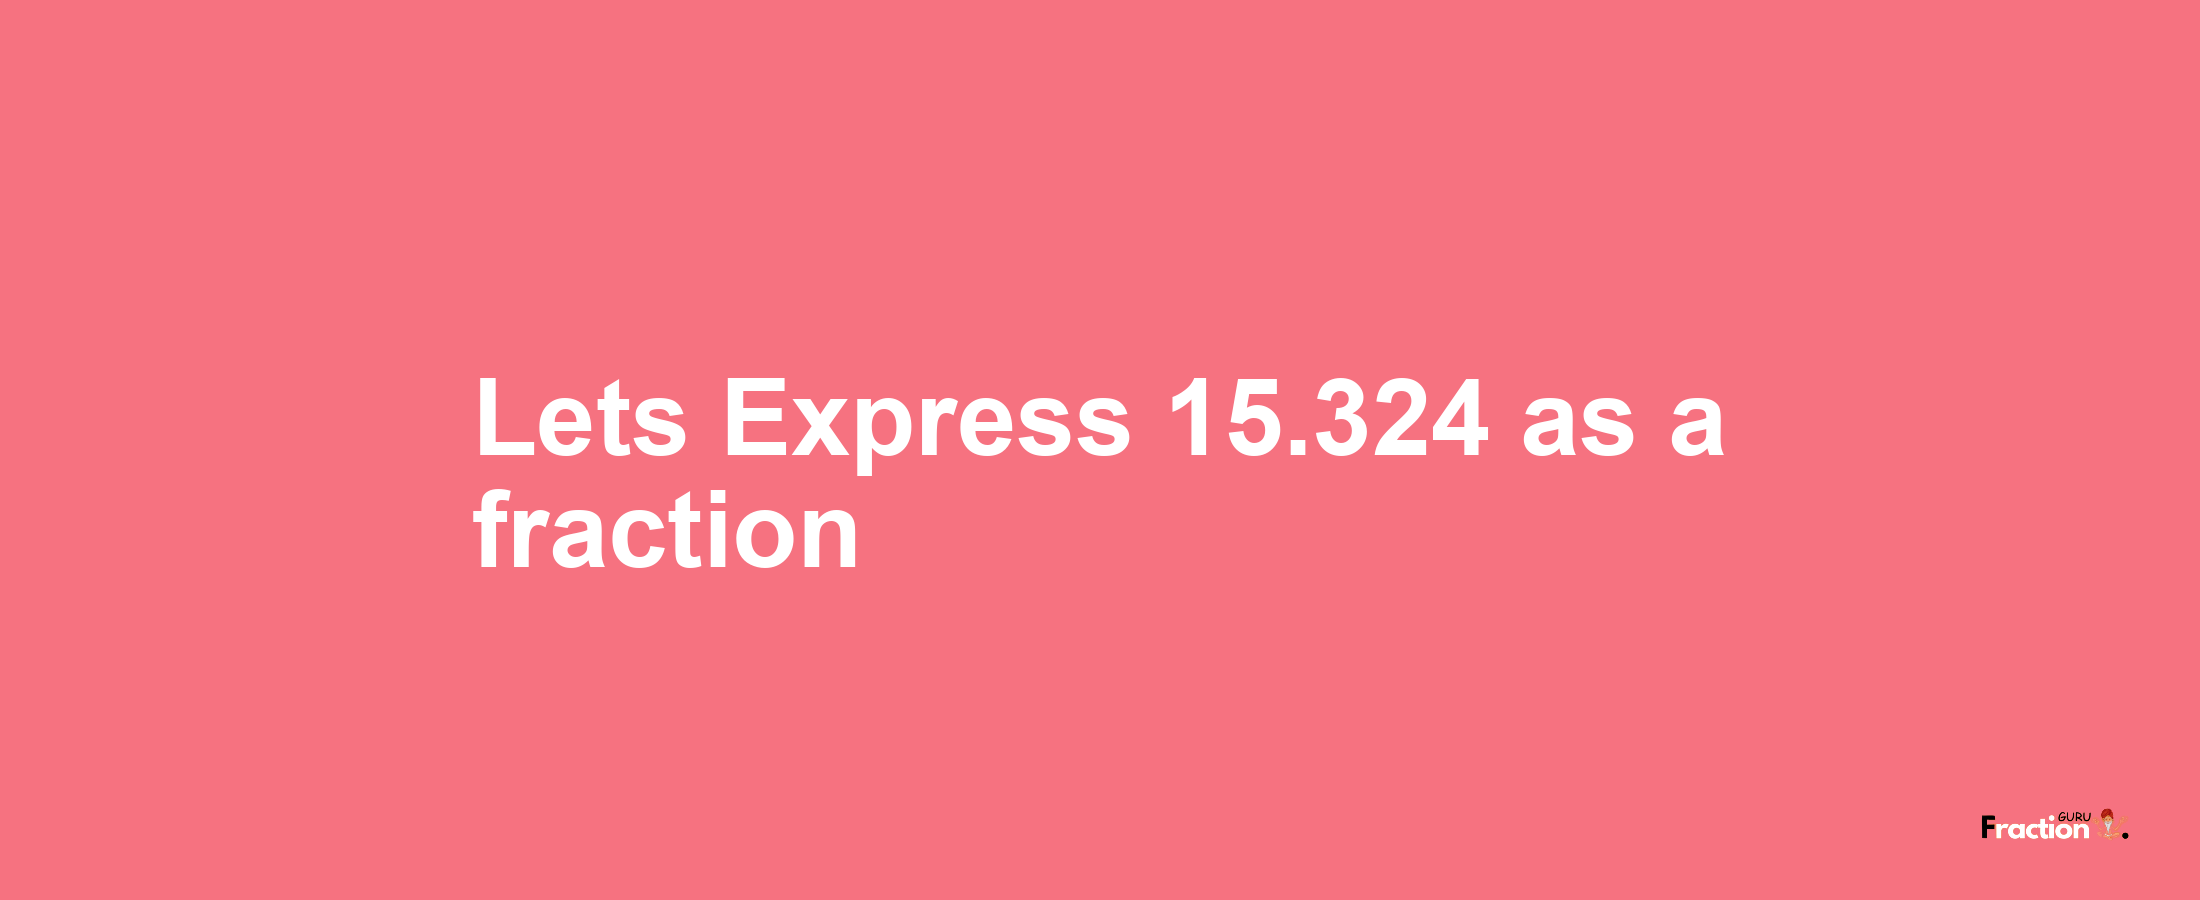 Lets Express 15.324 as afraction